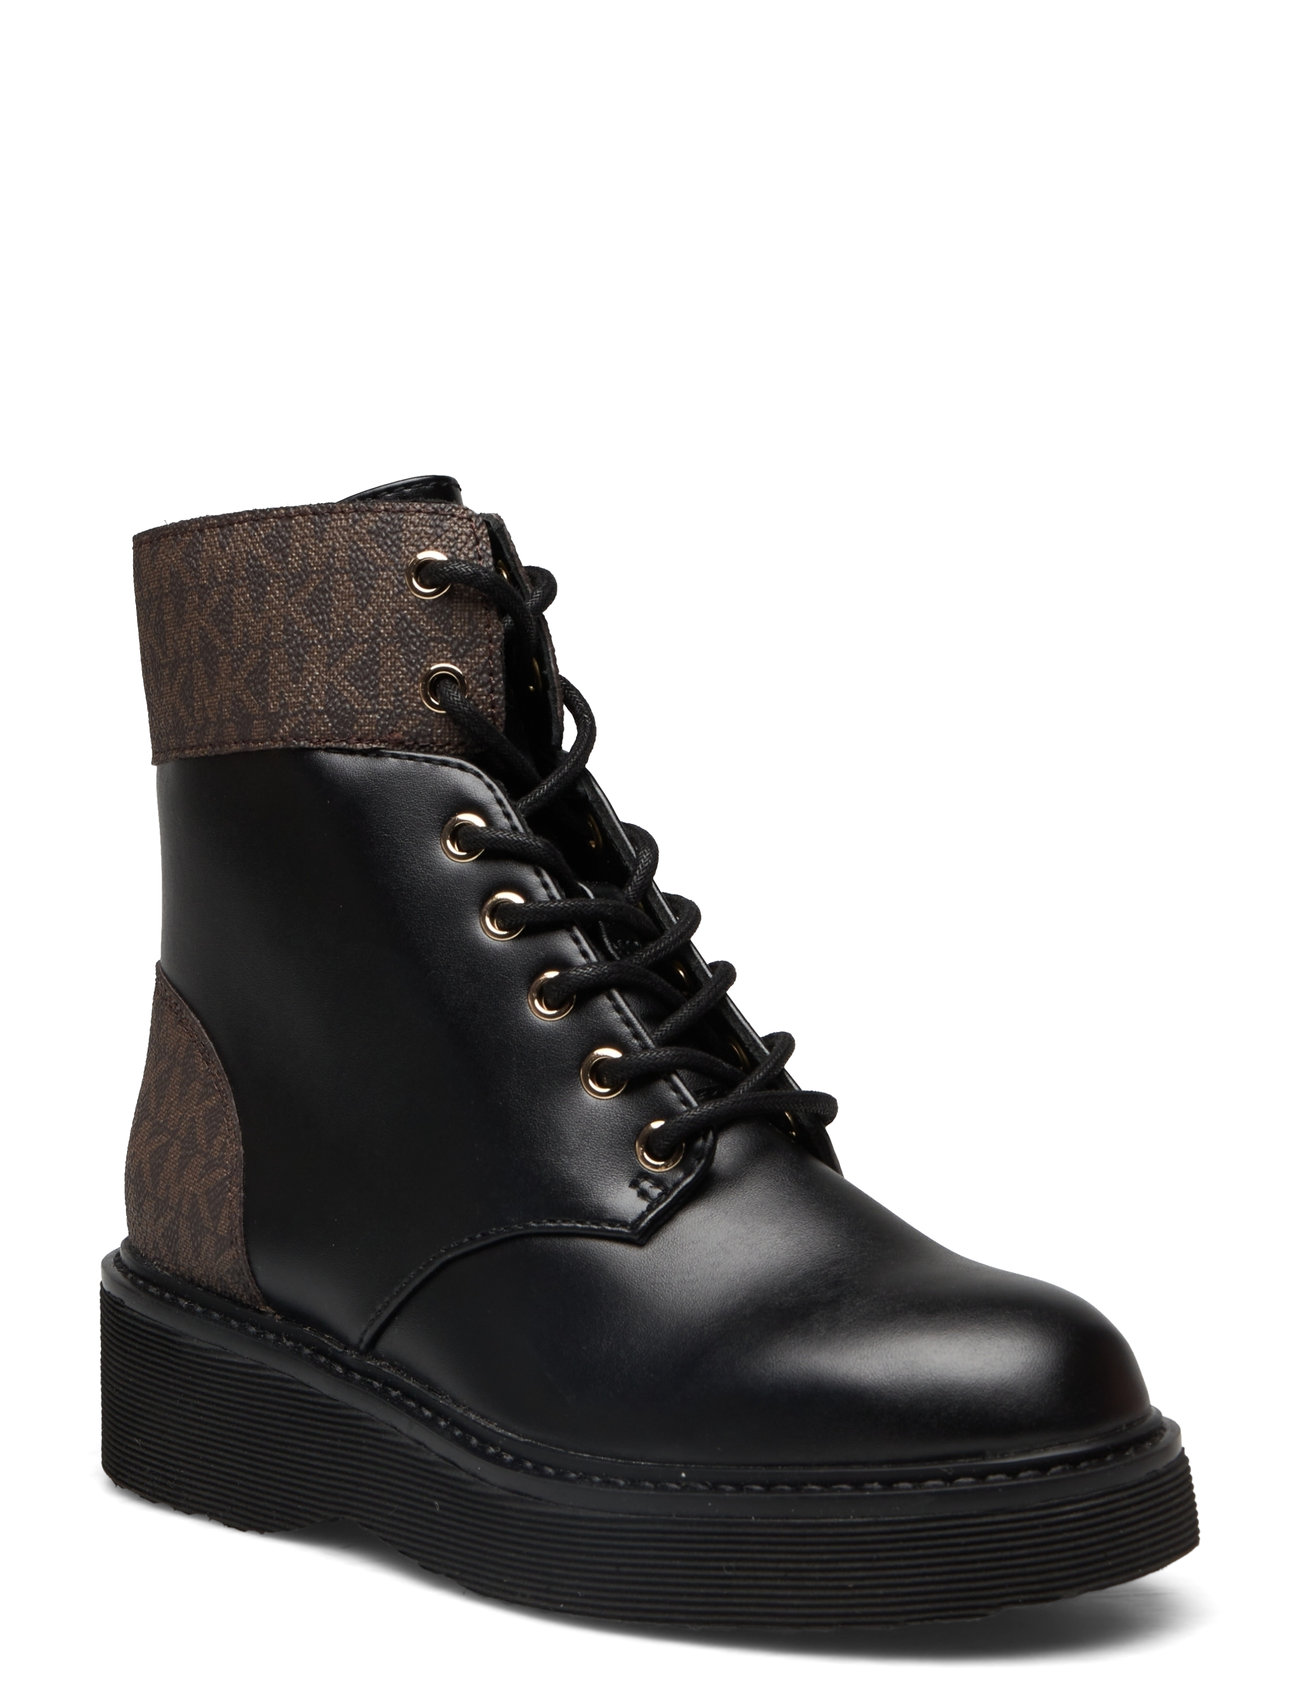 Aniya Lug Bootie Shoes Boots Ankle Boots Laced Boots Black Michael Kors